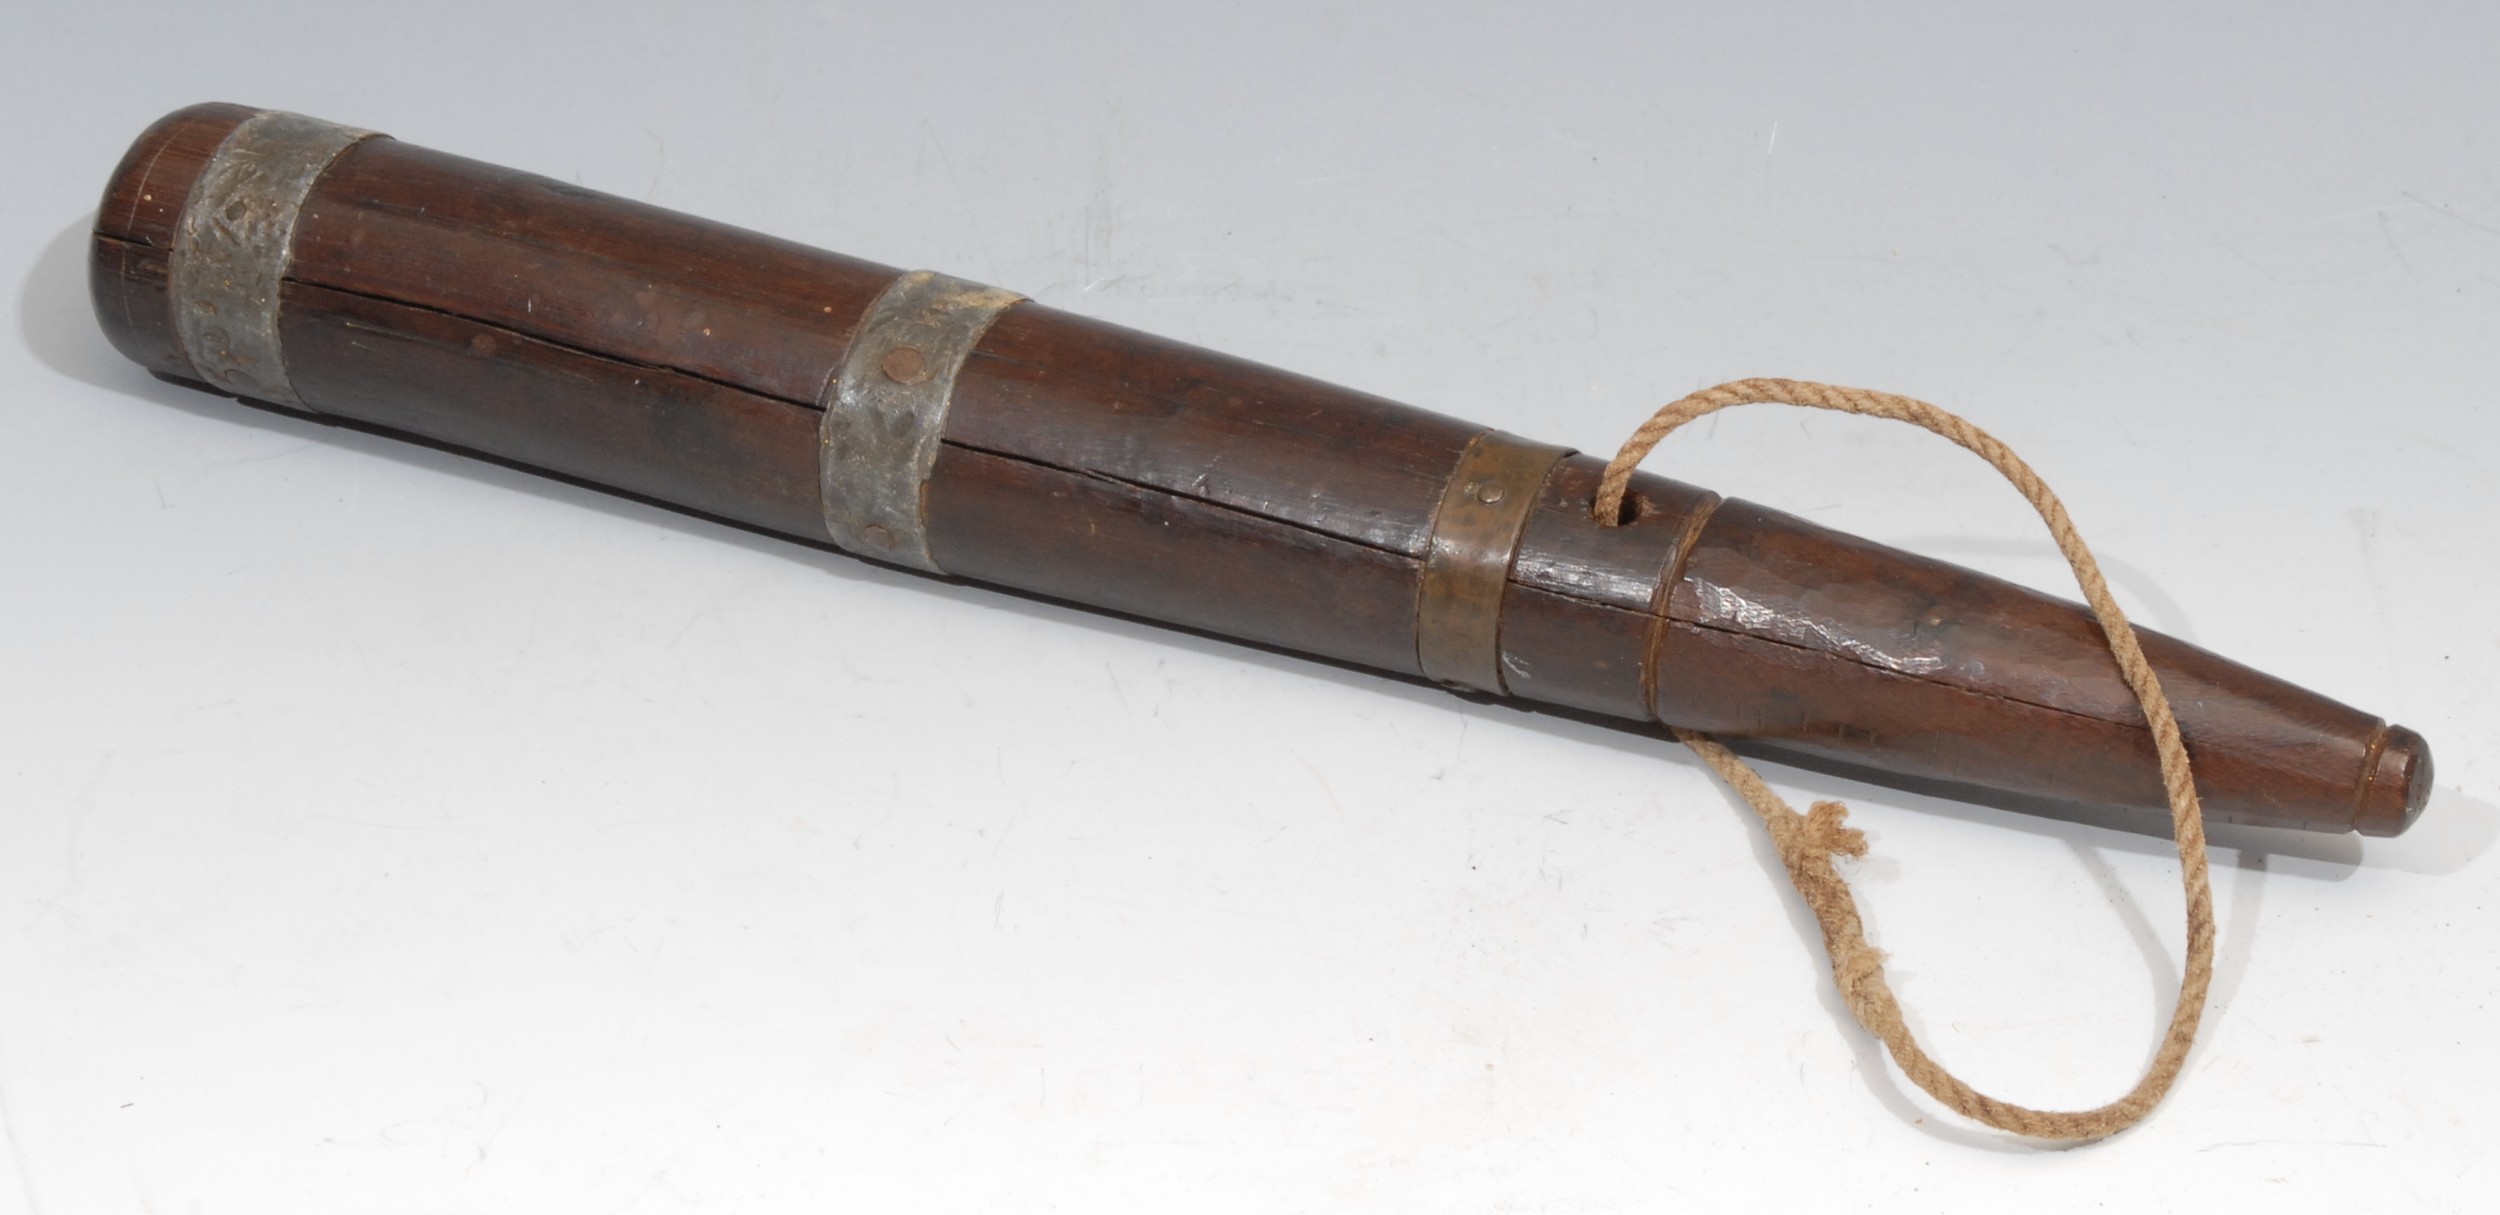 A 19th century hardwood club, possibly worked from a sailor’s fid, bound and weighted with lead - Image 2 of 2